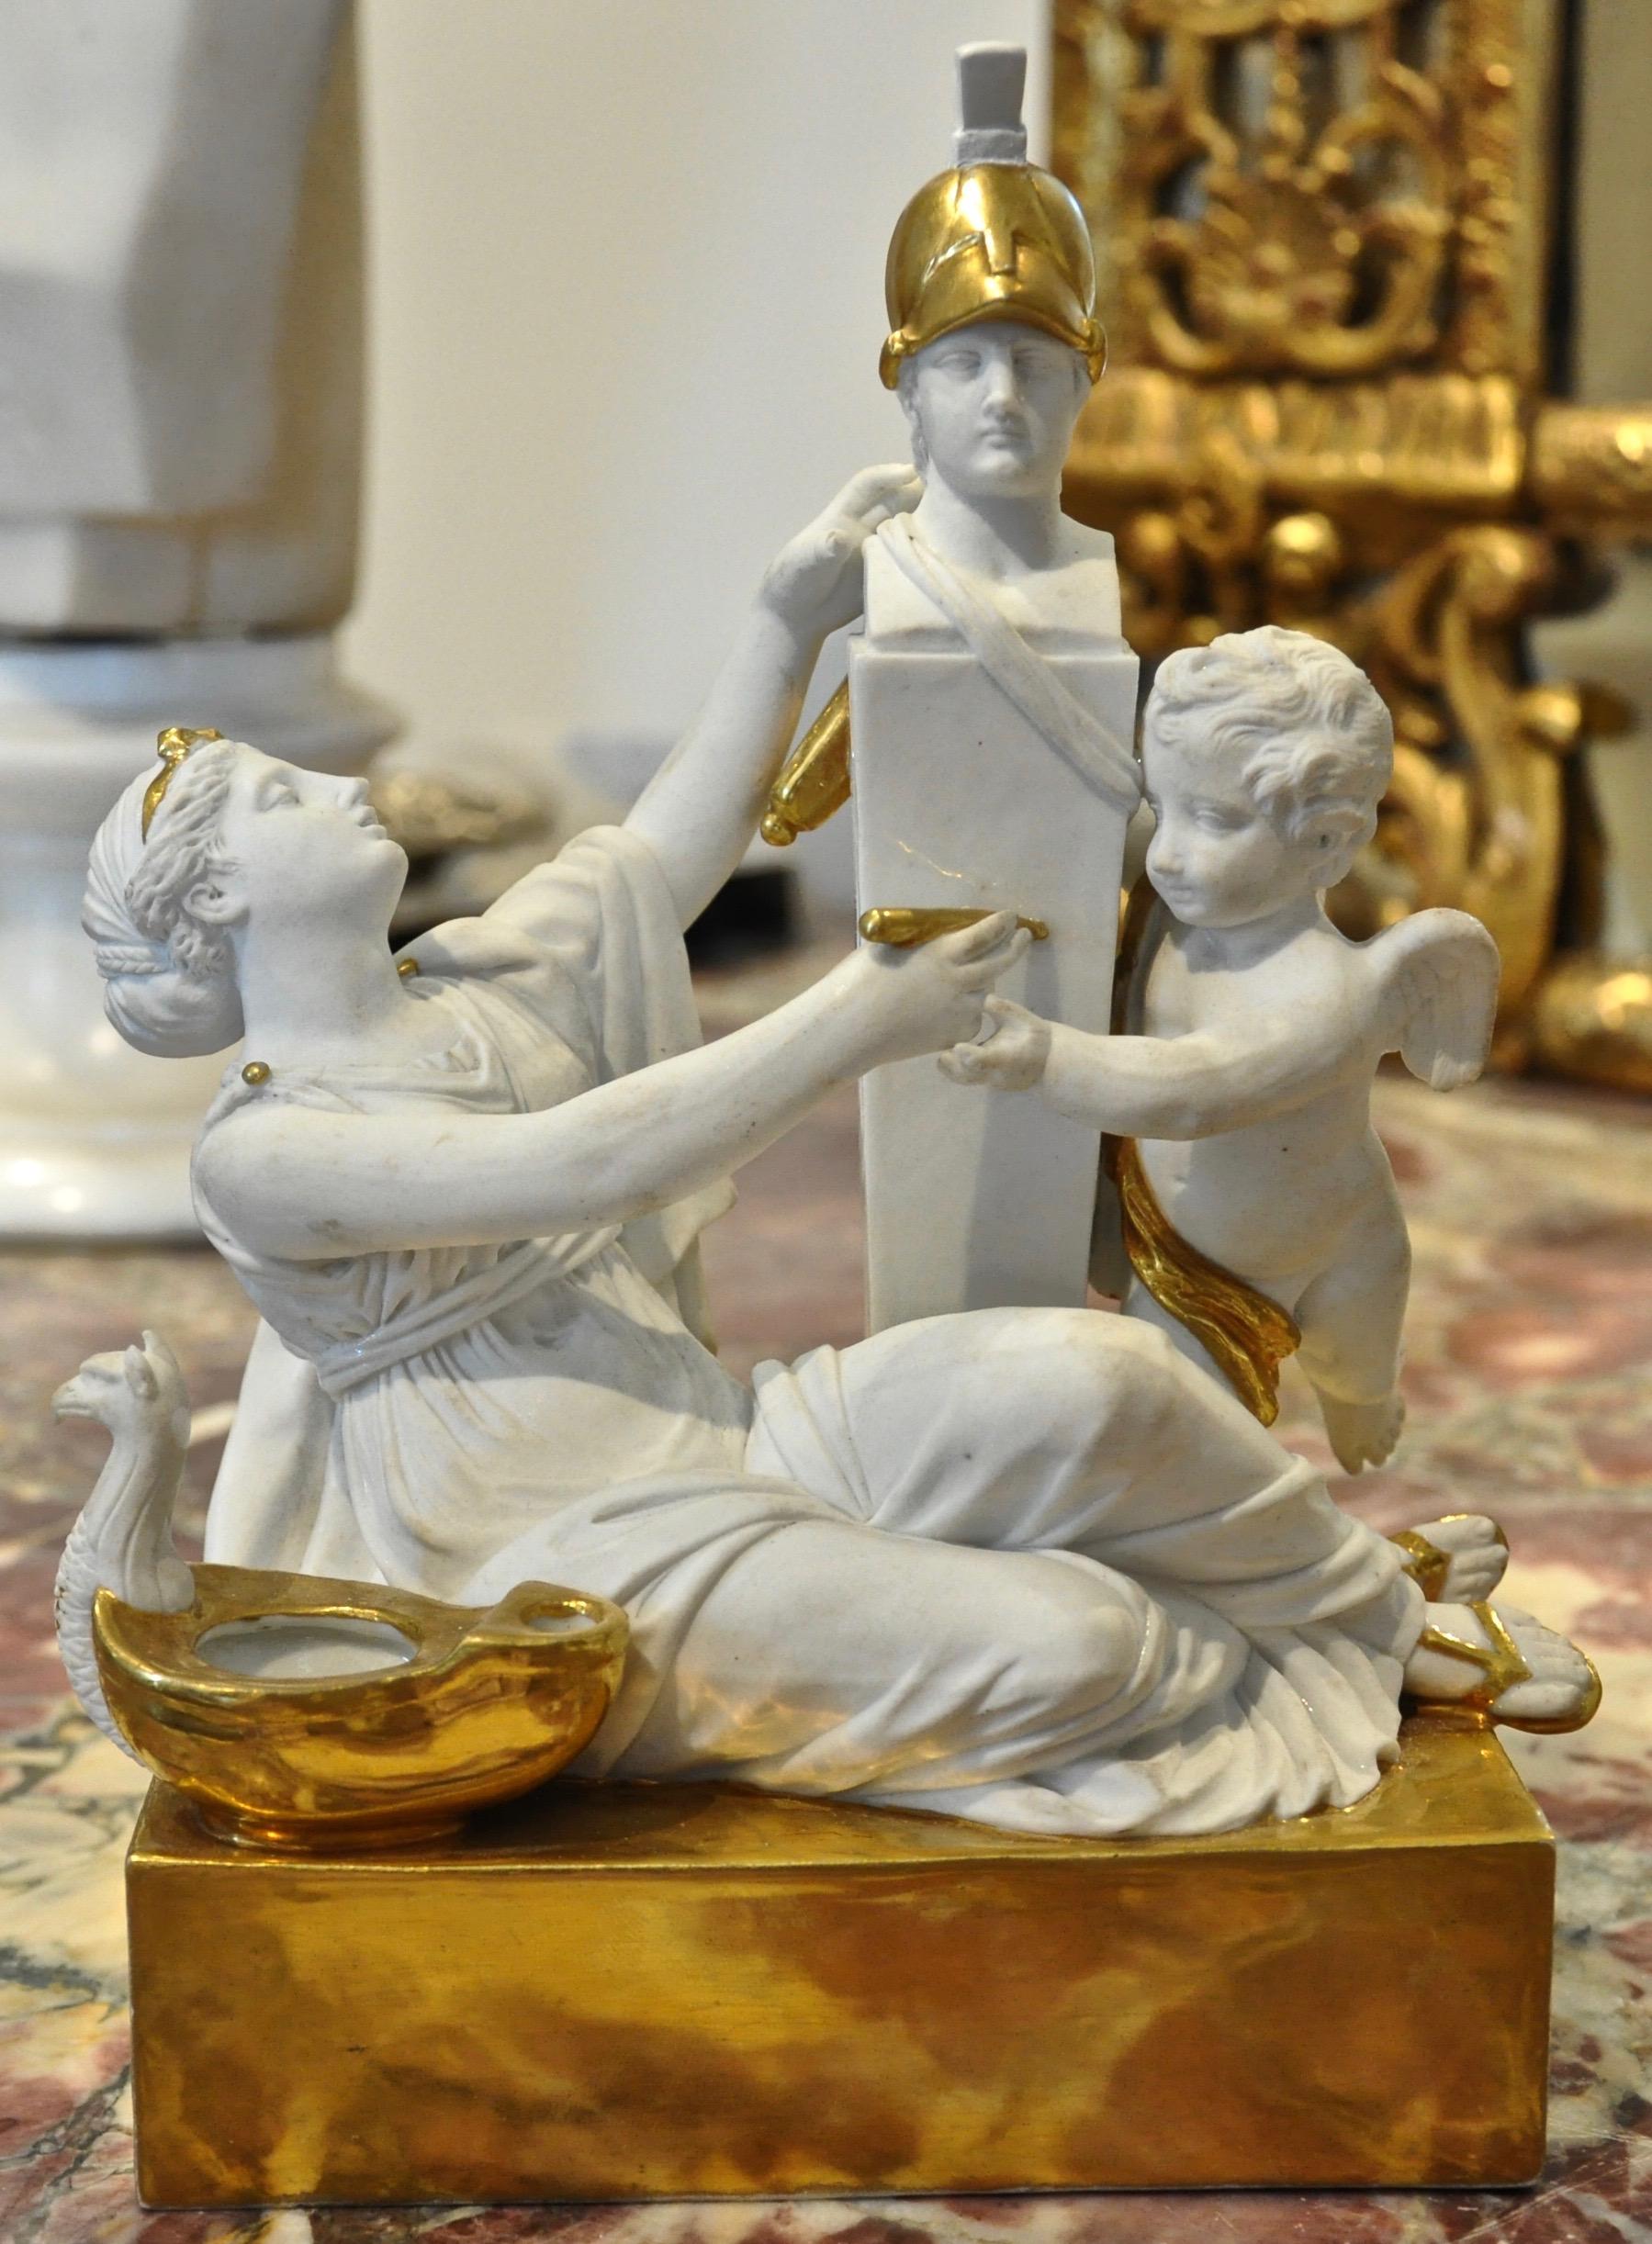 Period Bisque porcelain and gilt inkwell or Encrier

--Heroic and classical figures, woman, cupid.